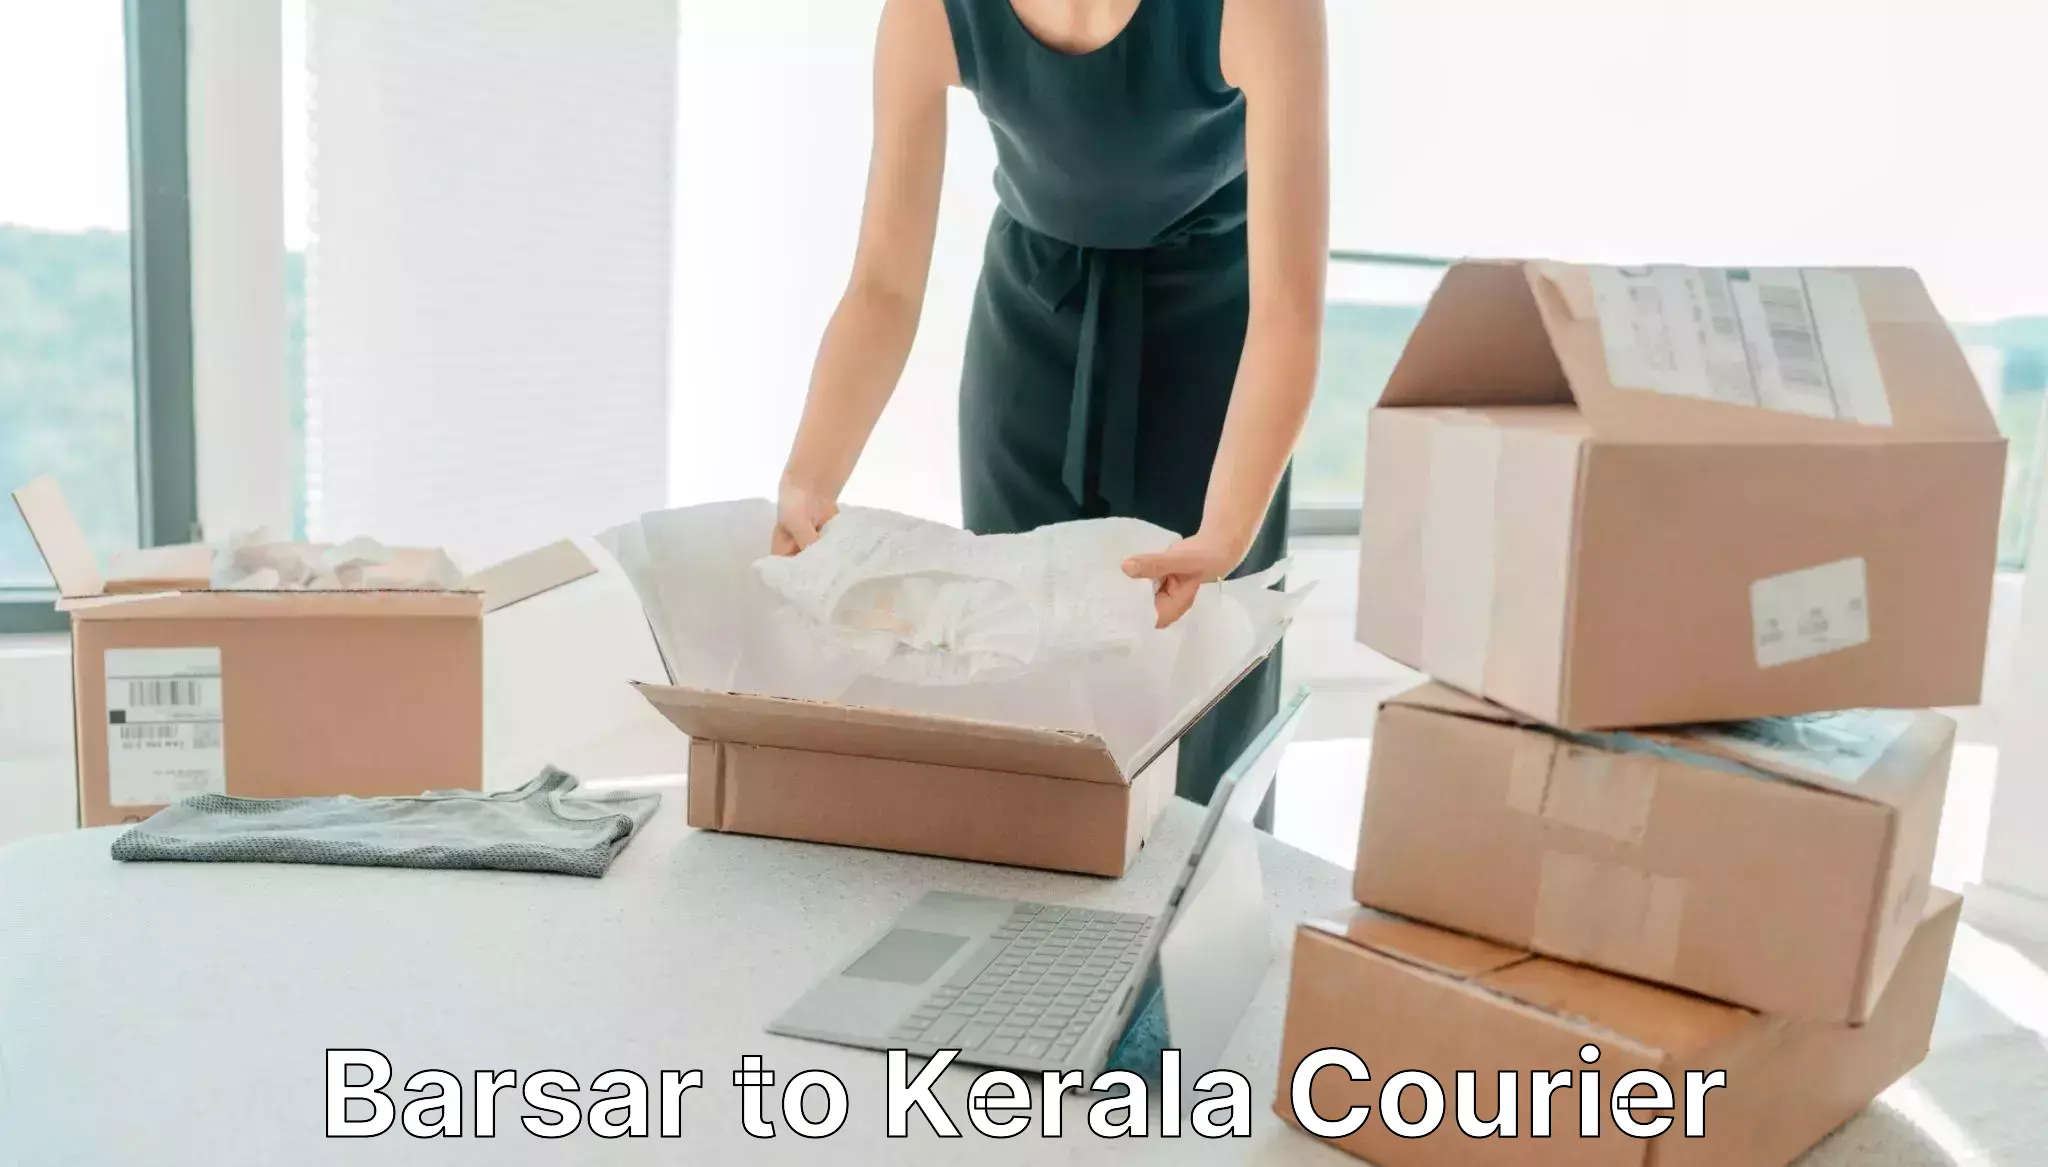 Sustainable delivery practices Barsar to Kerala